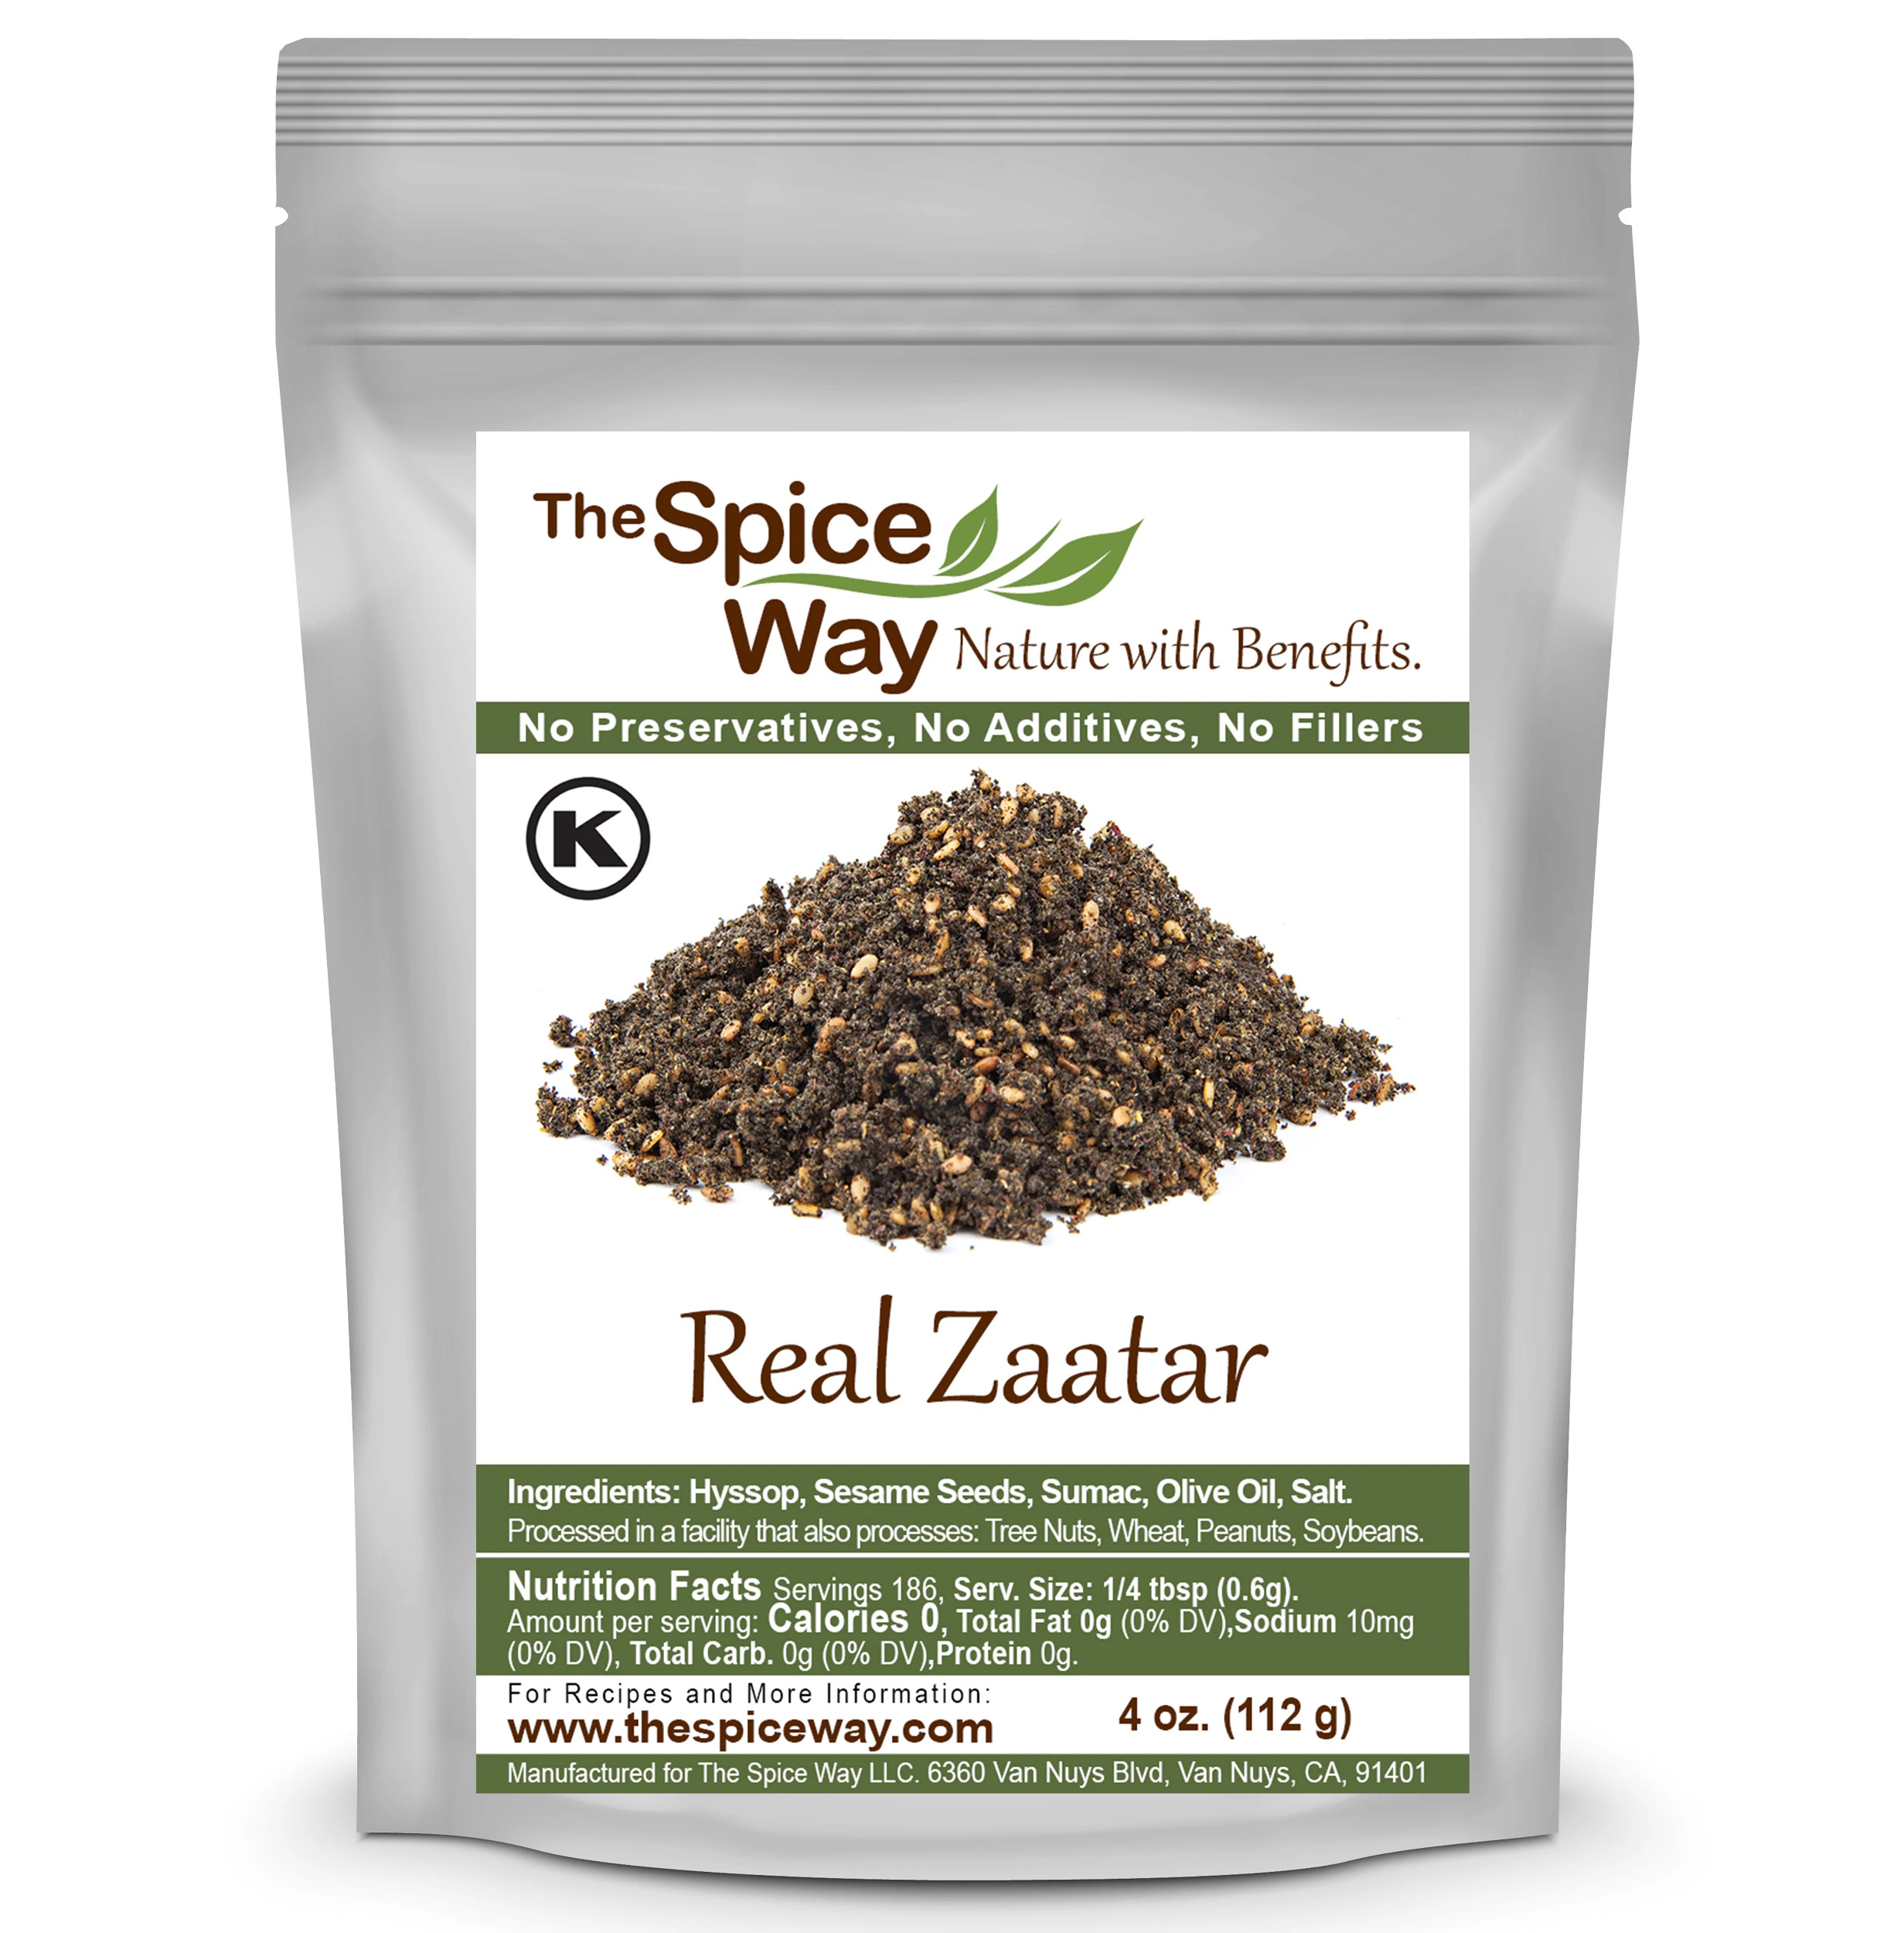 The Spice Way Real Zaatar - Middle Eastern Spice Blend – All Natural with Hyssop and Sumac - 4 oz. - image 1 of 8